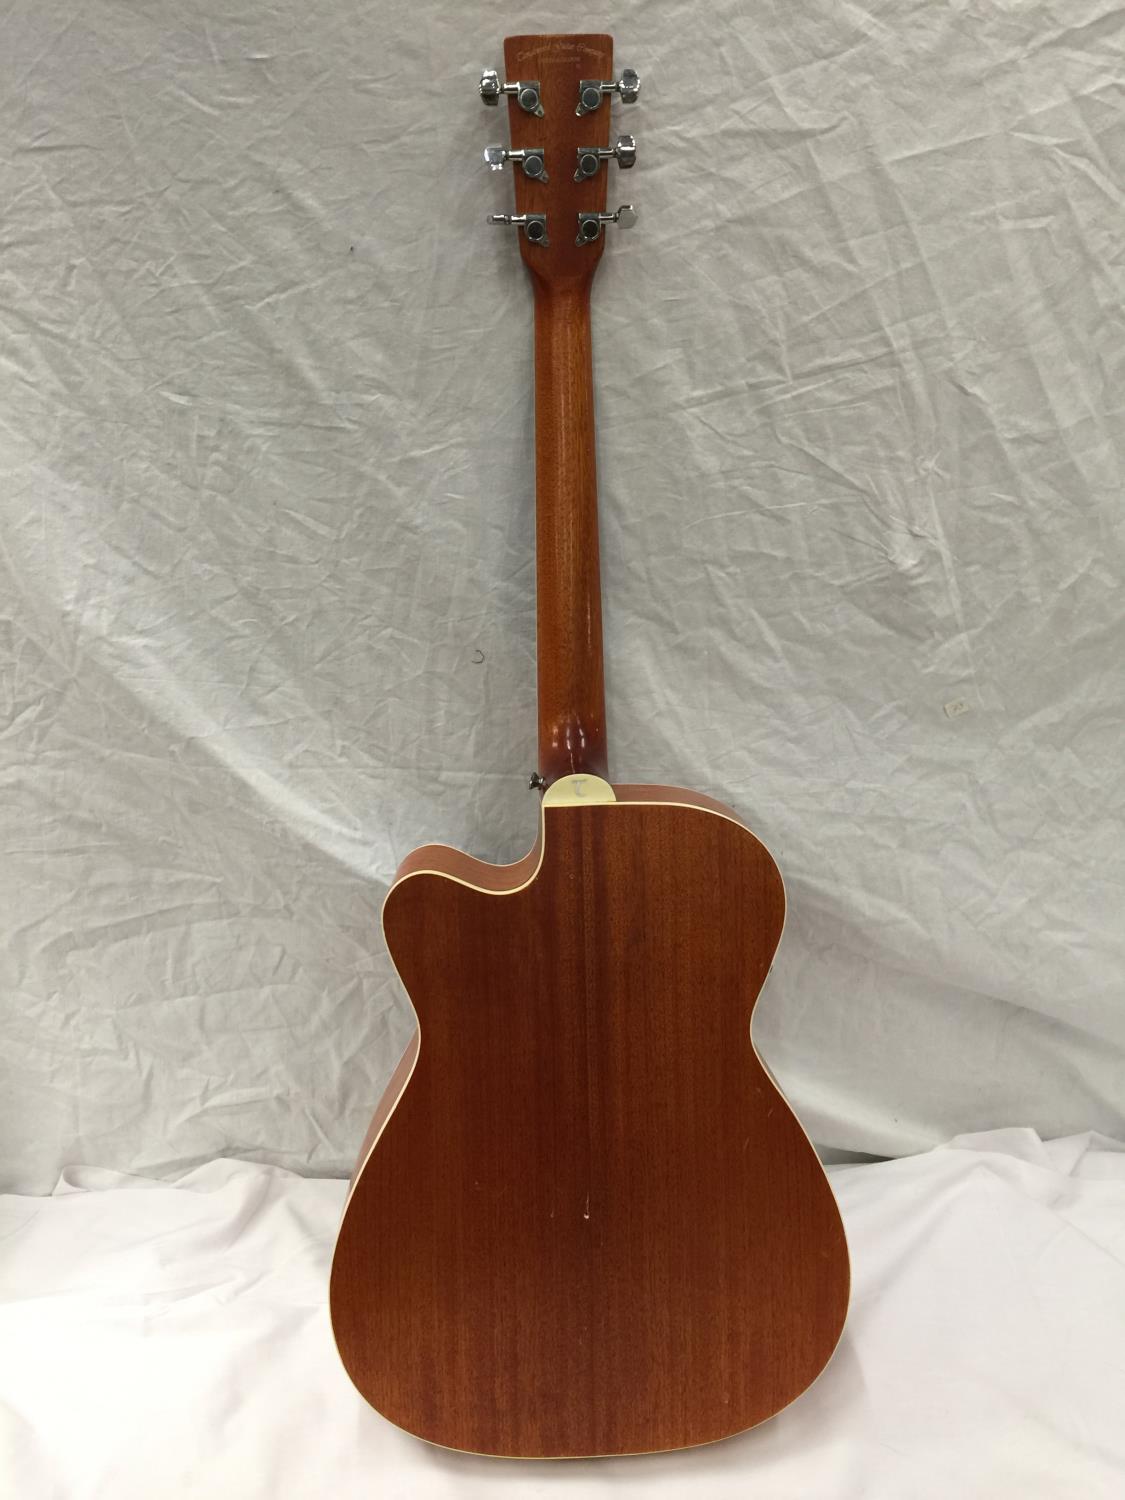 A TANGLEWOOD NASHVILLE SEMI ACOUSTIC GUITAR - Image 11 of 15